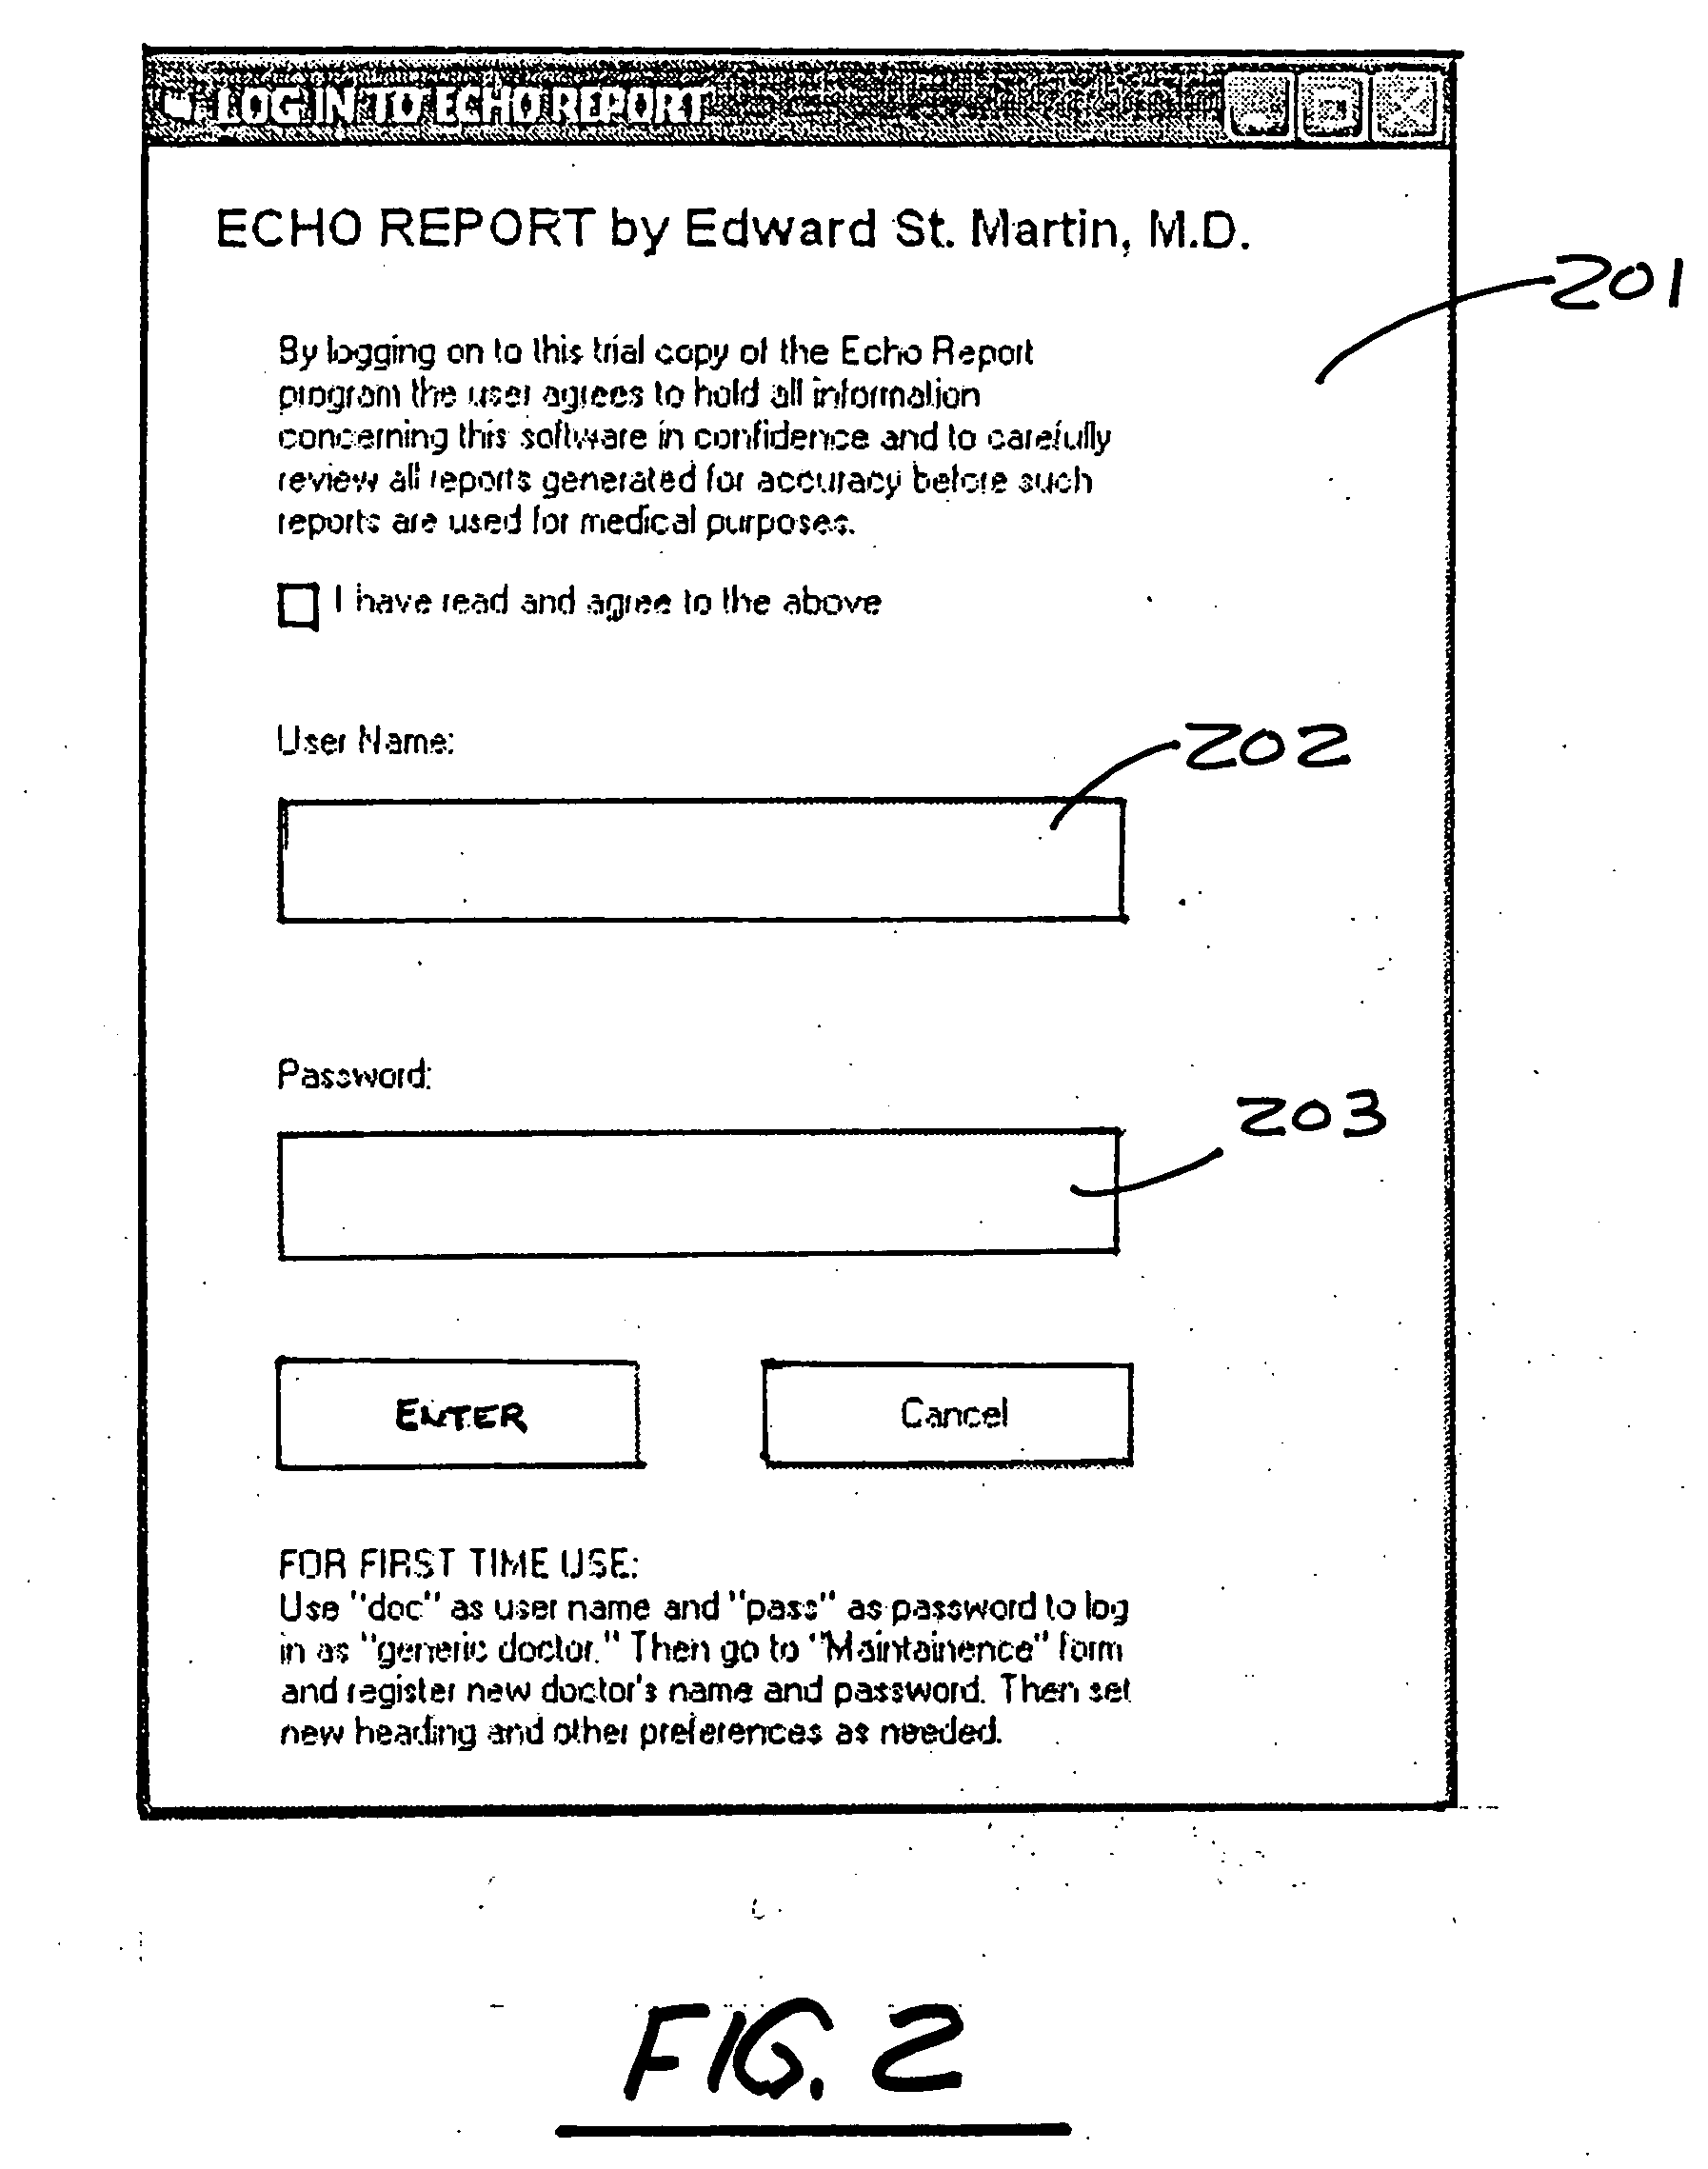 Method and system for generating an echocardiogram report